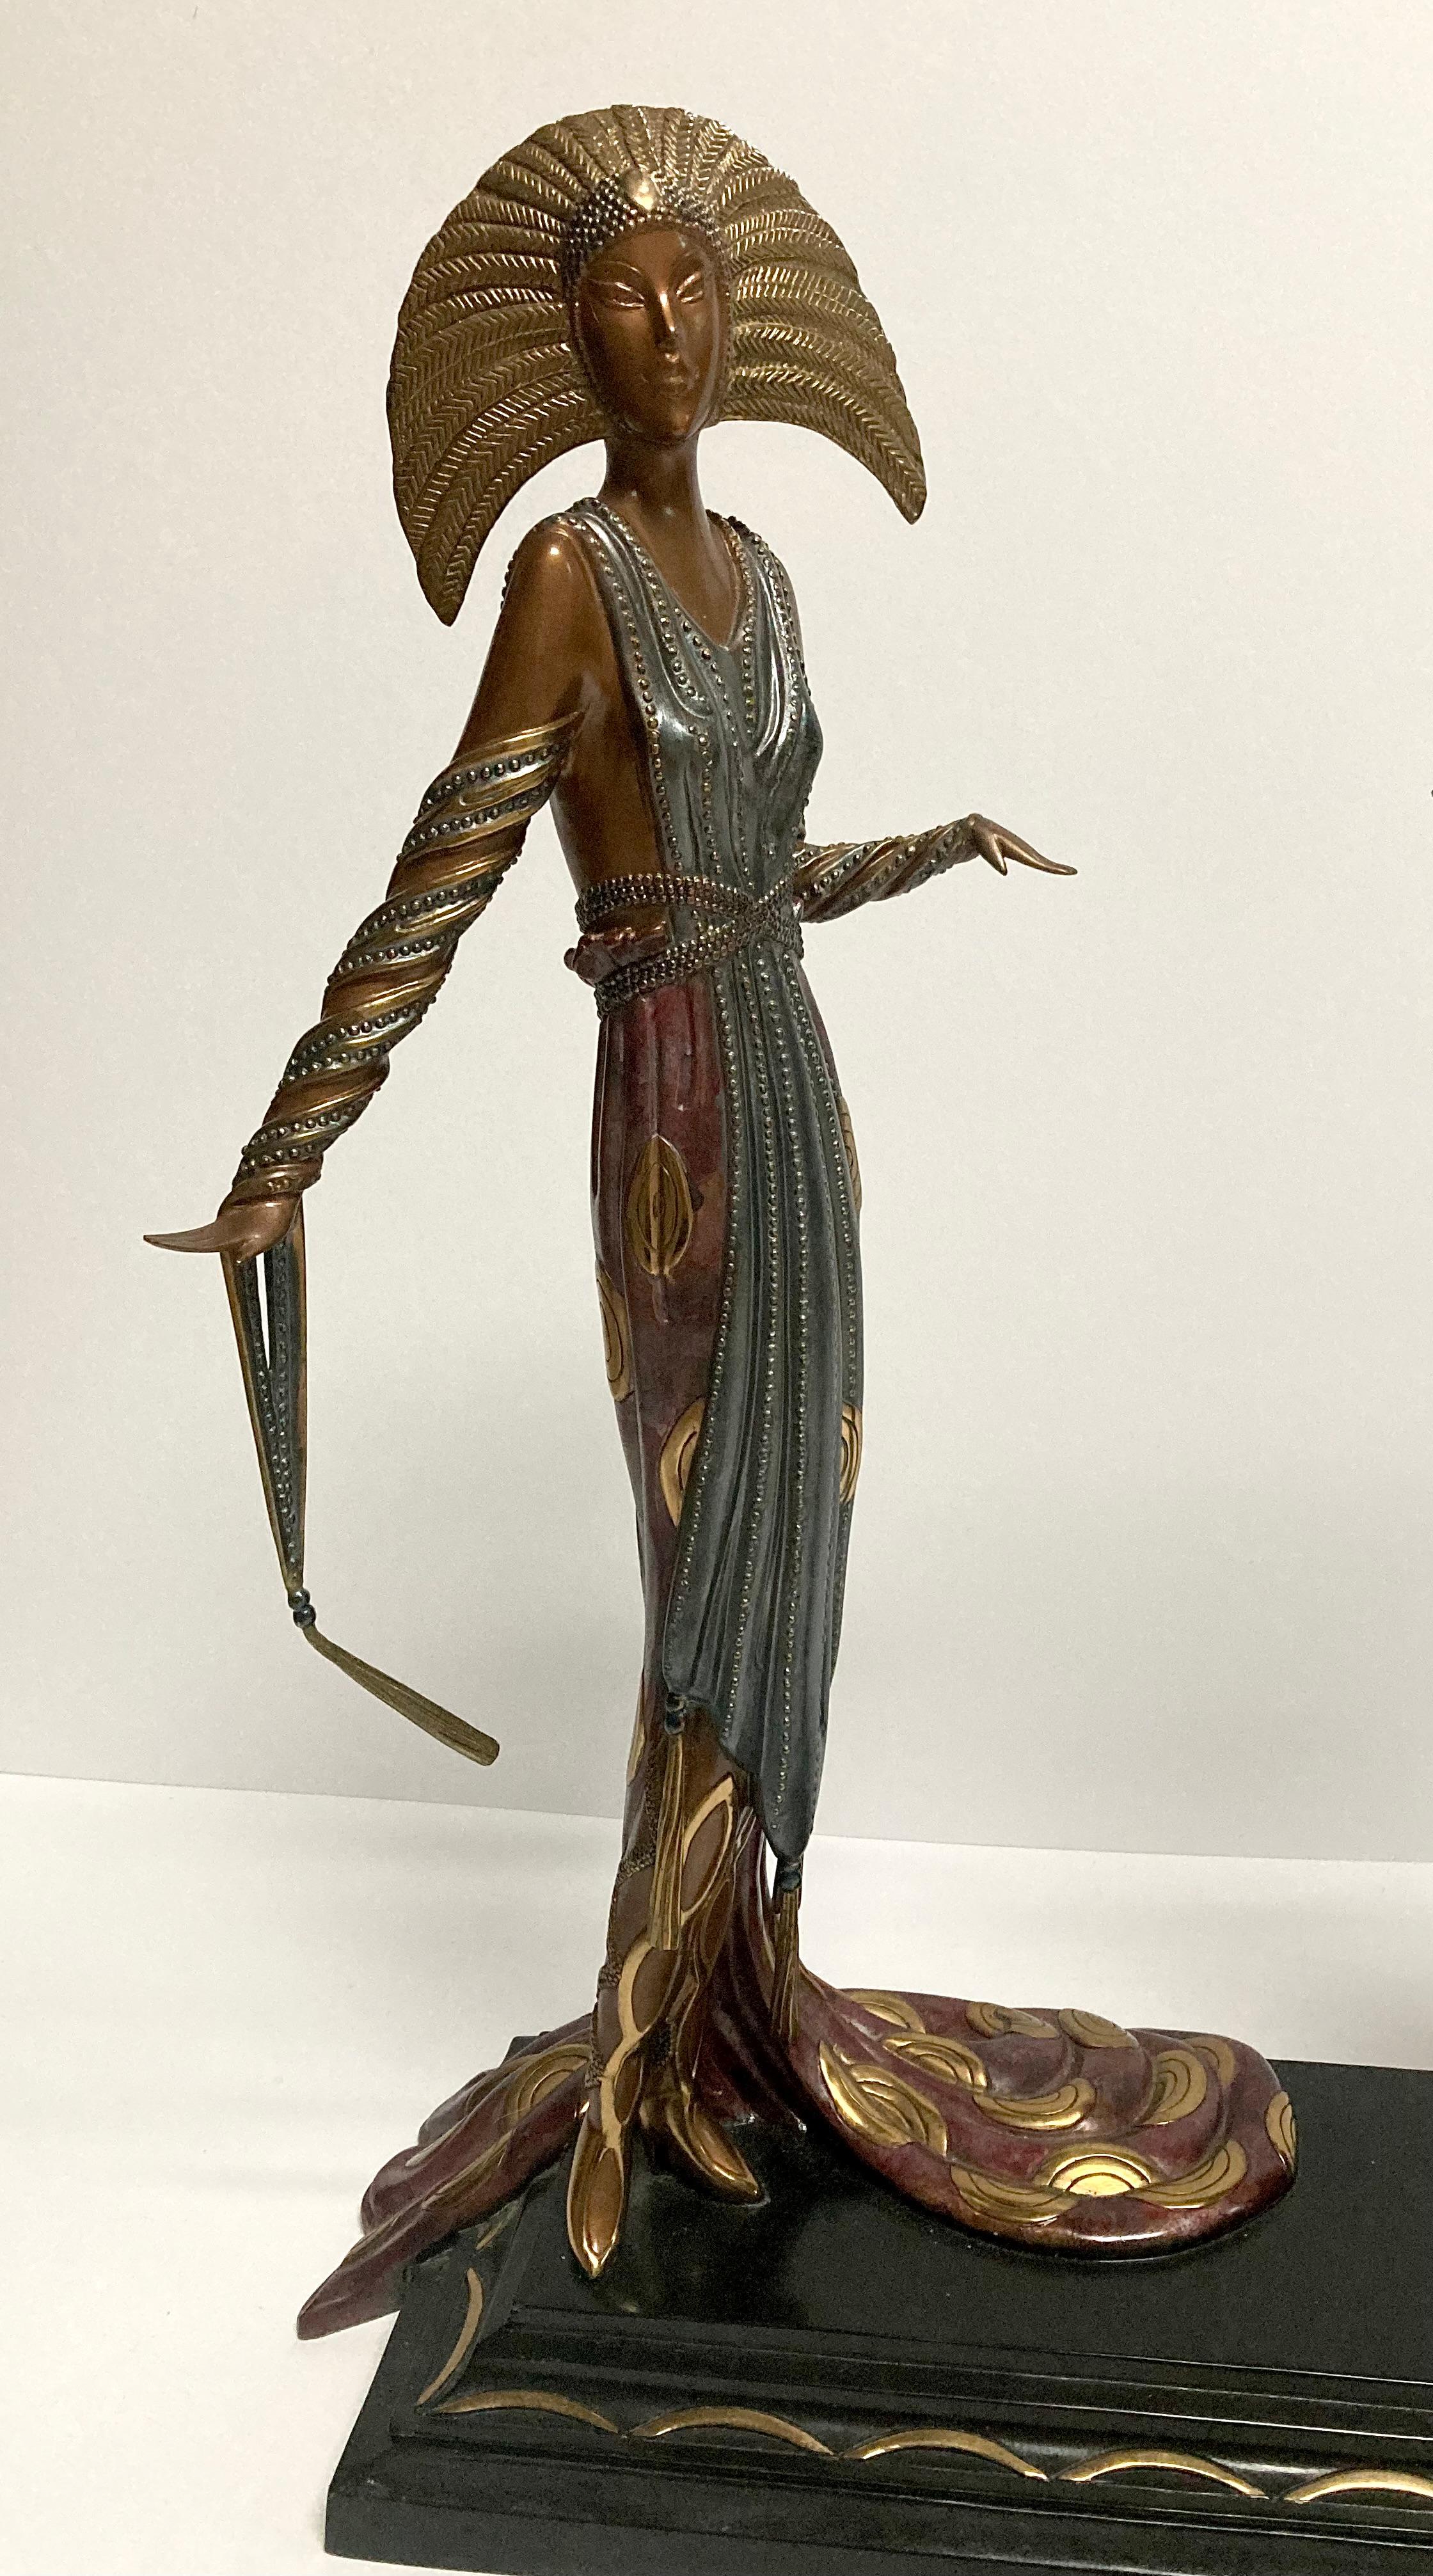 This is an Erte original bronze the 2 vamps signed and numbered. In excellent condition. Measures 19x18x6 inches


